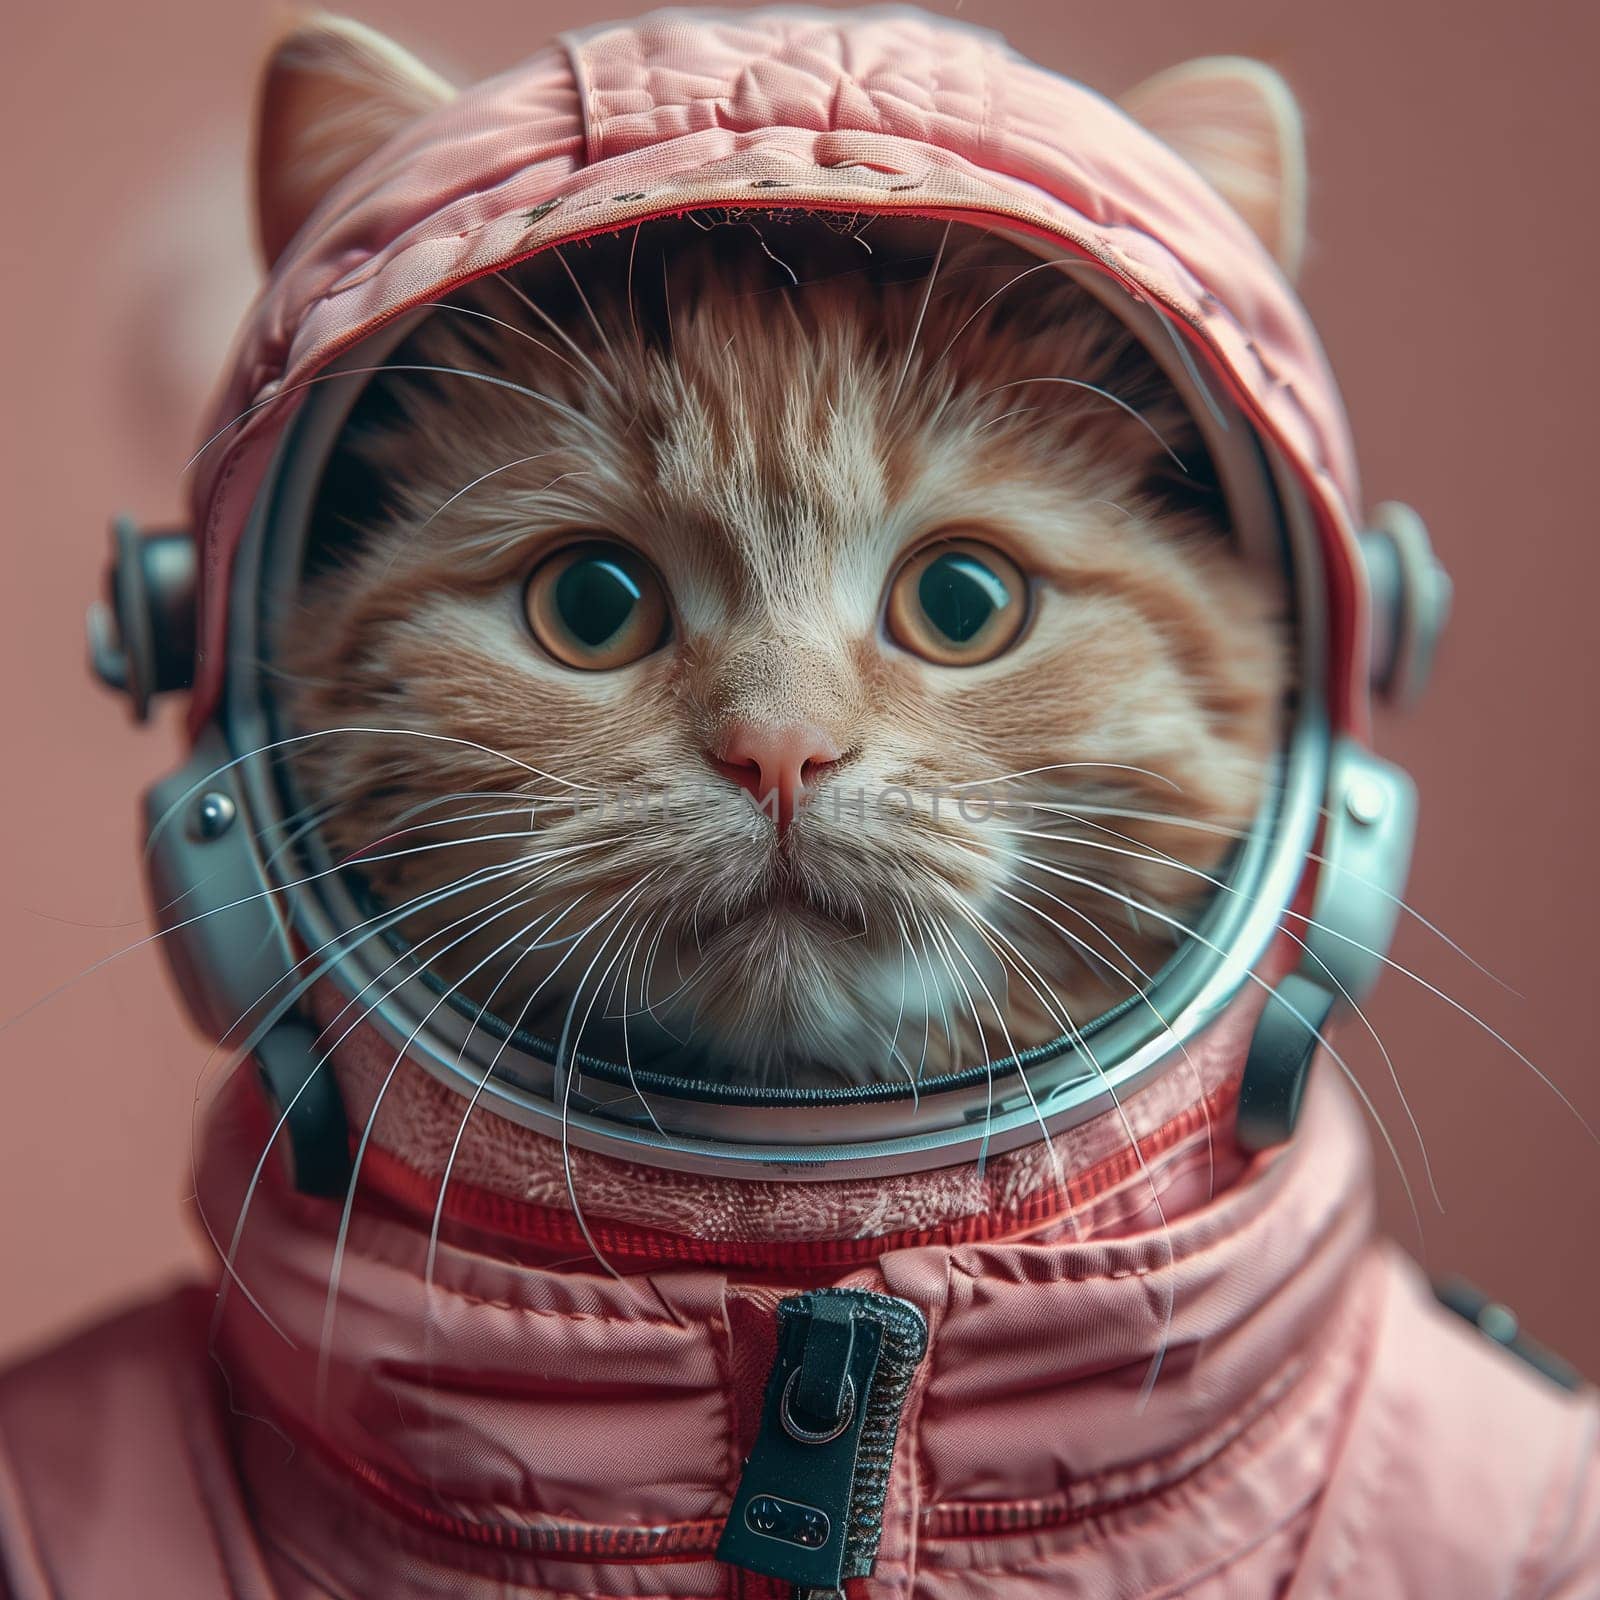 Felidae wearing pink space suit and helmet, with whiskers and fur by richwolf